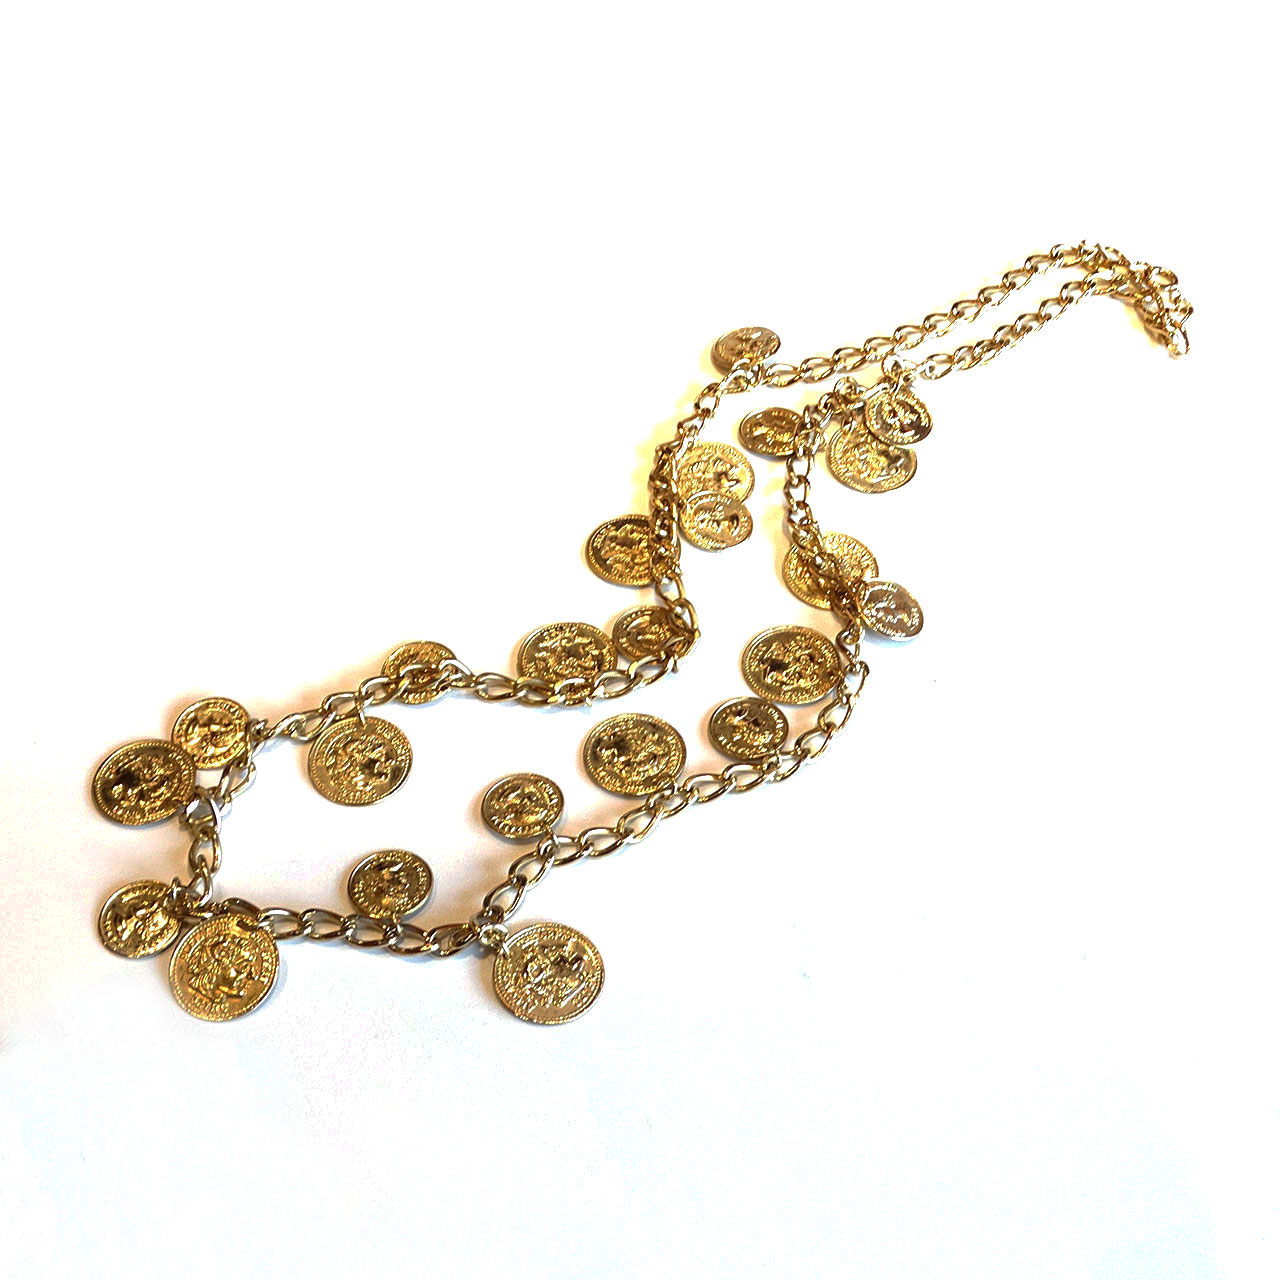 80s Vintage gold metal coin necklace